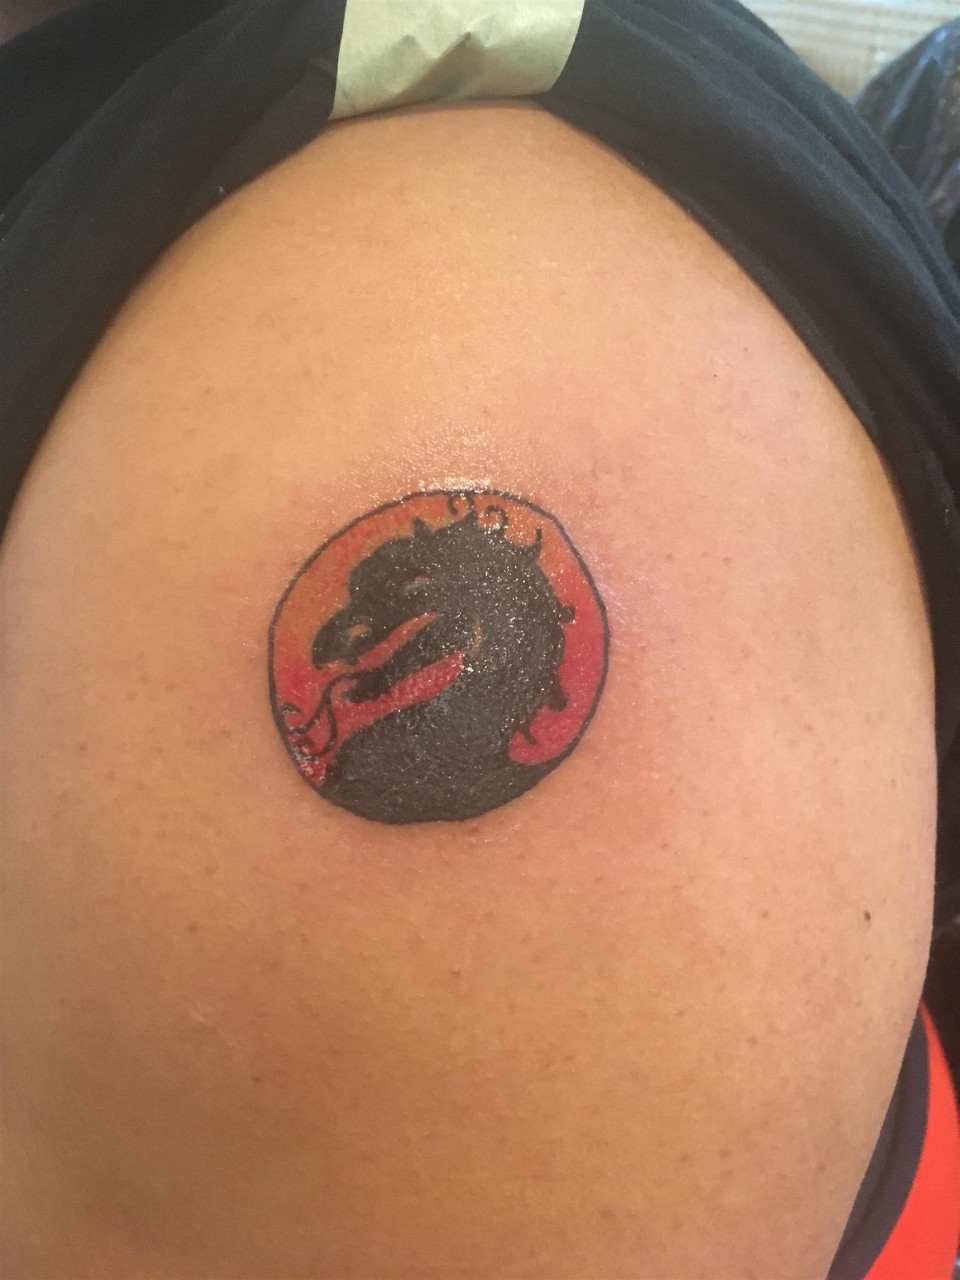 Yours truly Mortal Kombat tattoo done by if  iFunny